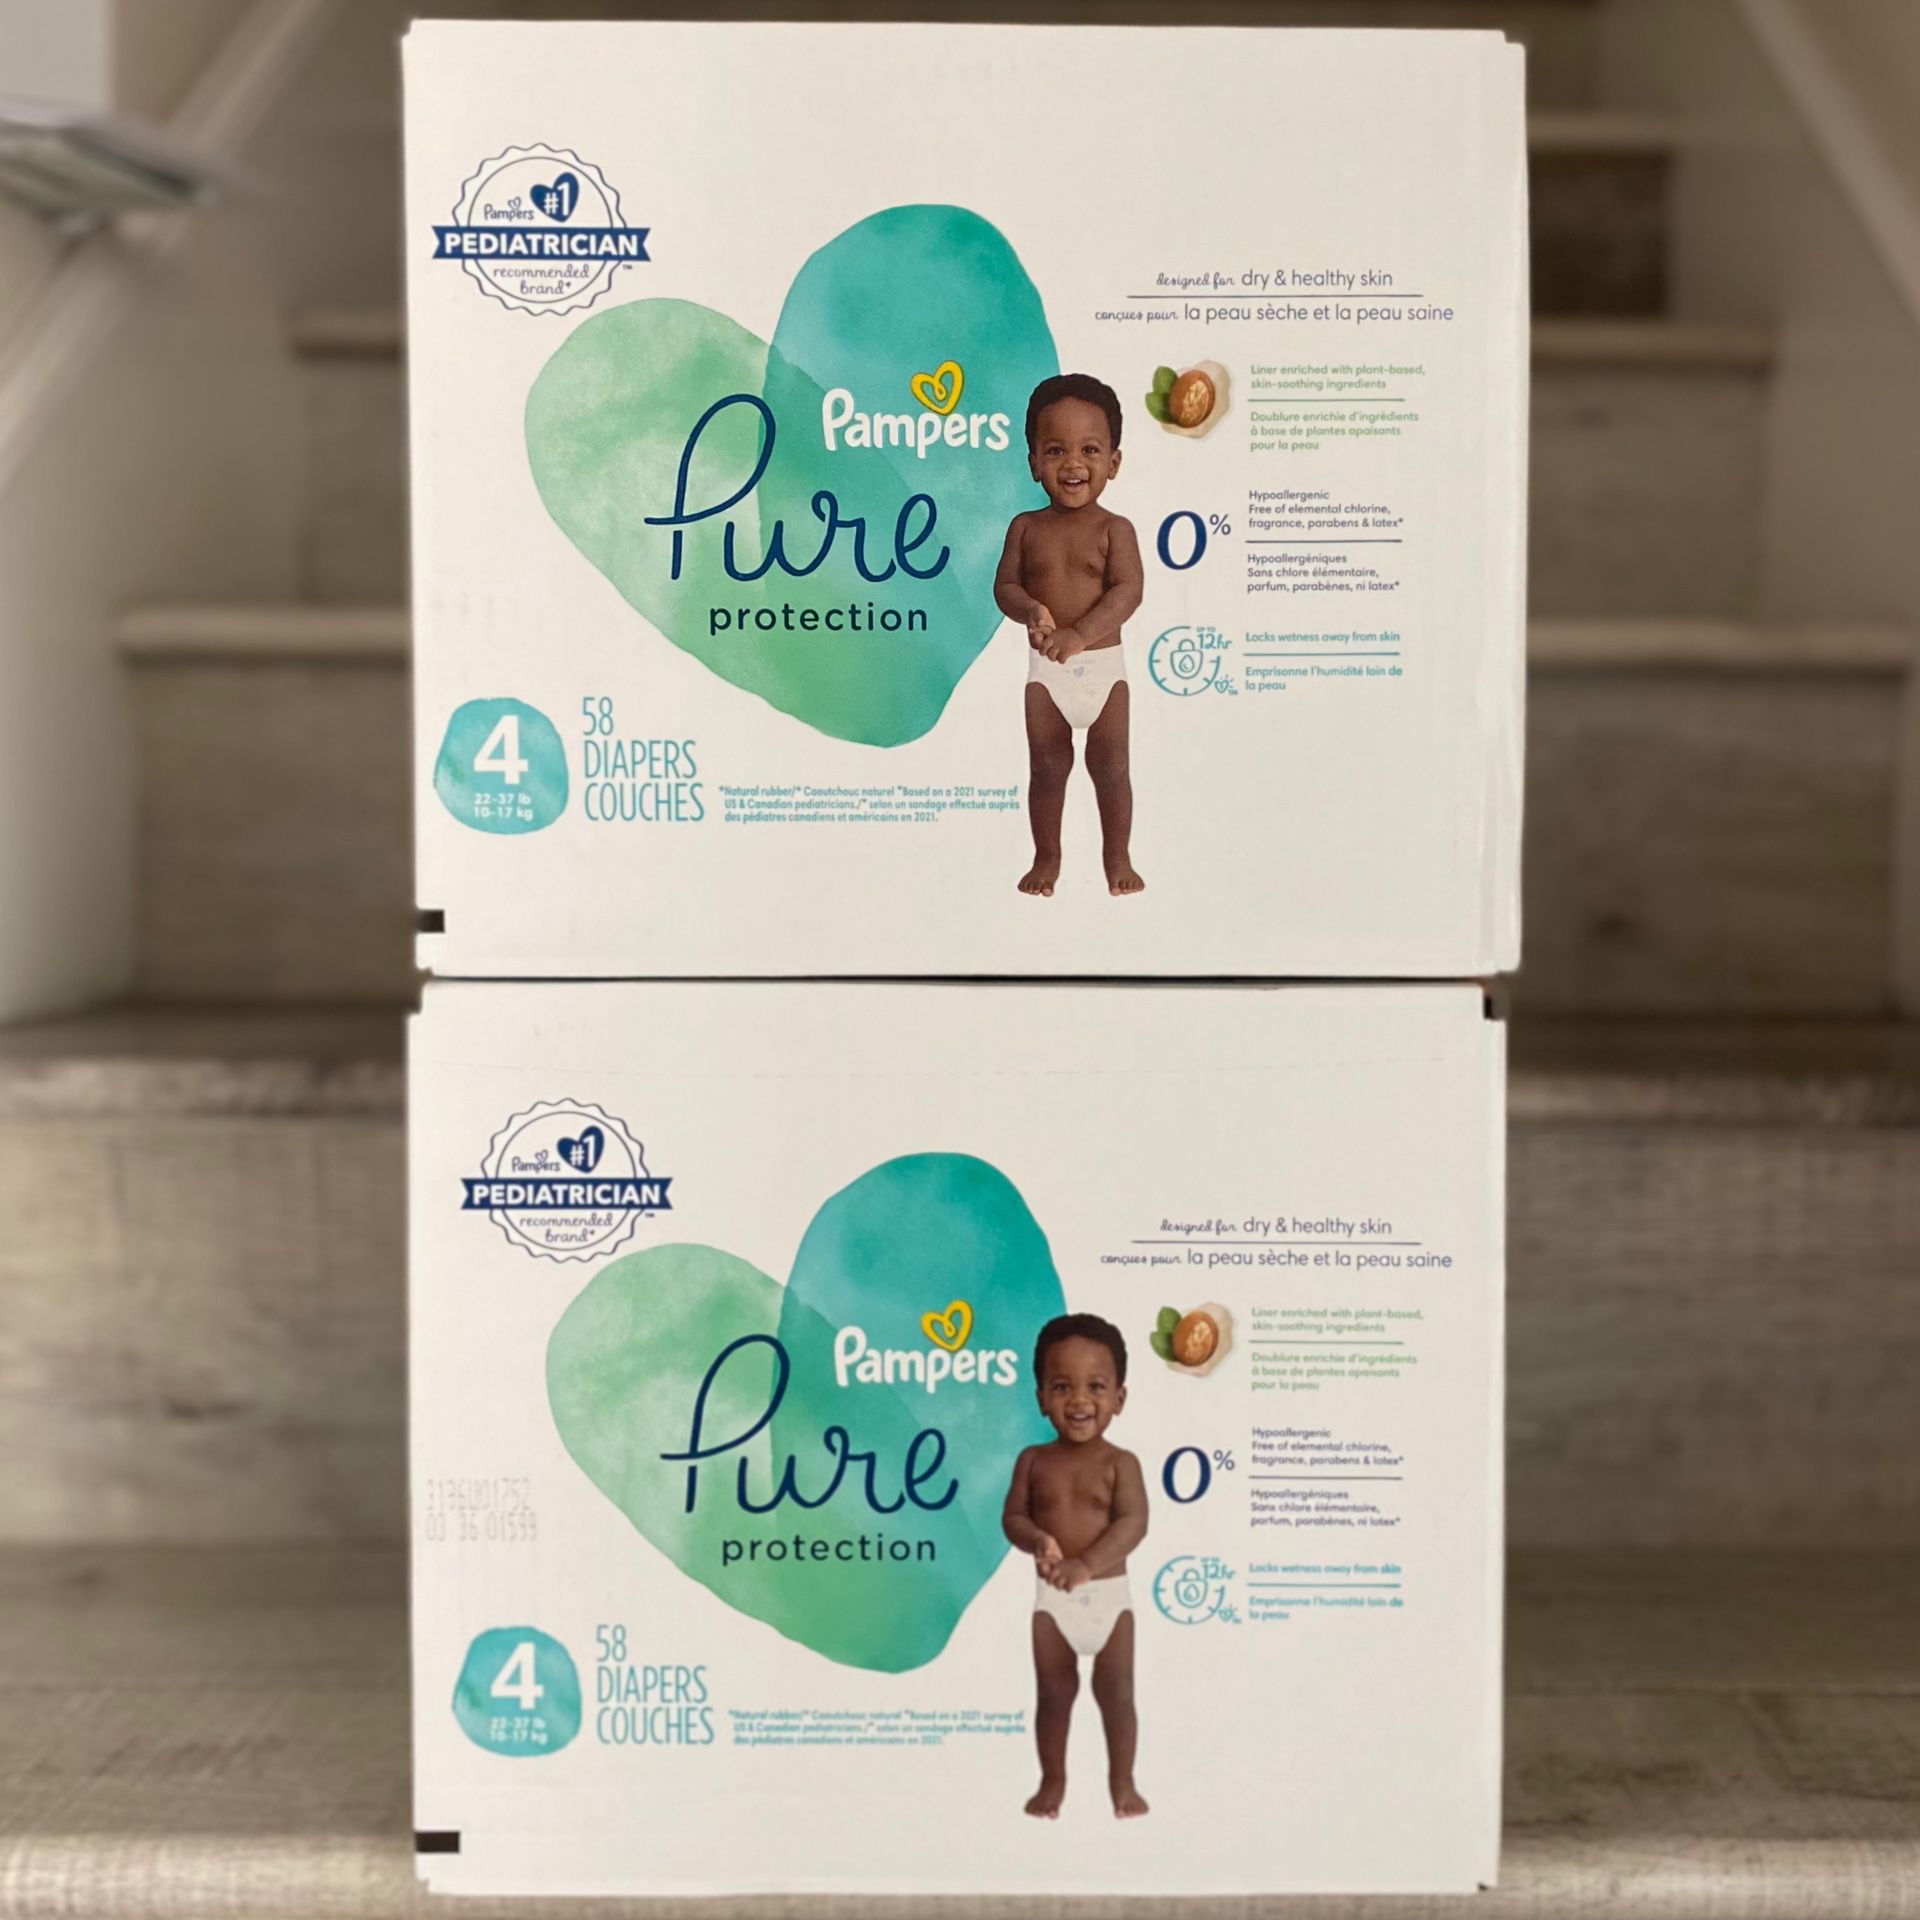 Brand New Pampers Pure Protection Diapers- Both Boxes For $30